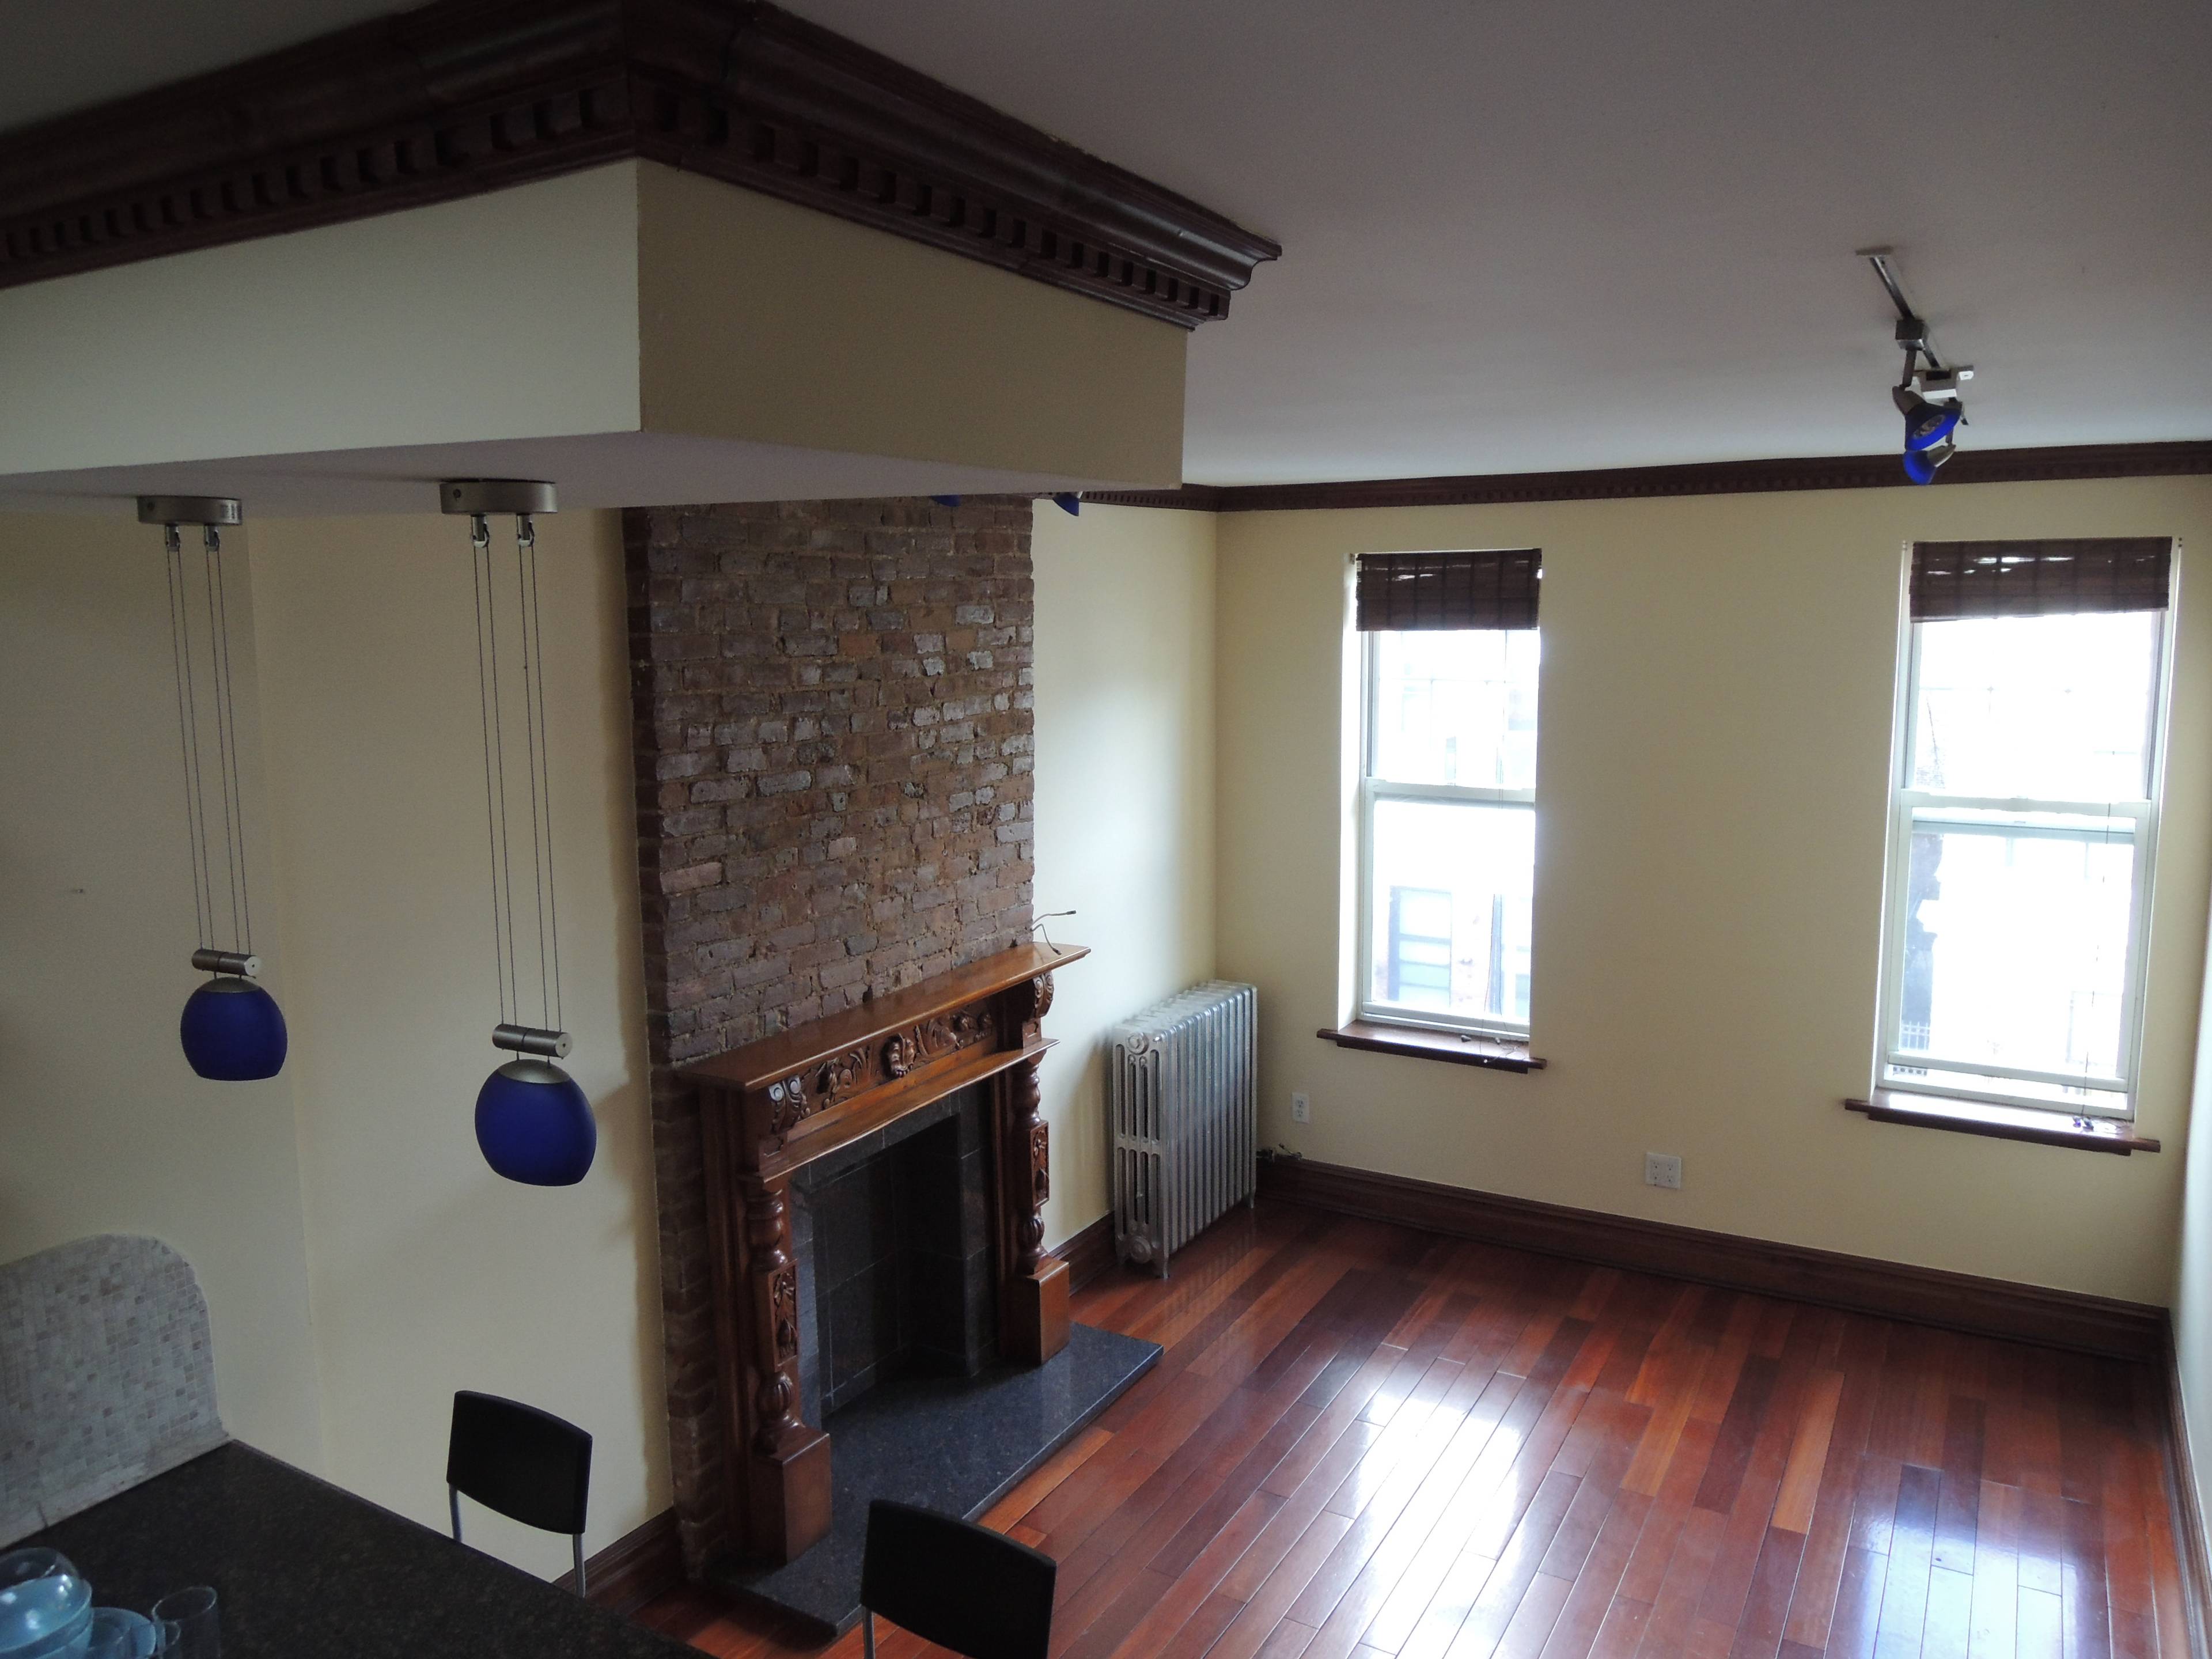 Renovated junior 3 bedroom on top floor of 3 story brick townhouse on the South Slope Gowanus border.